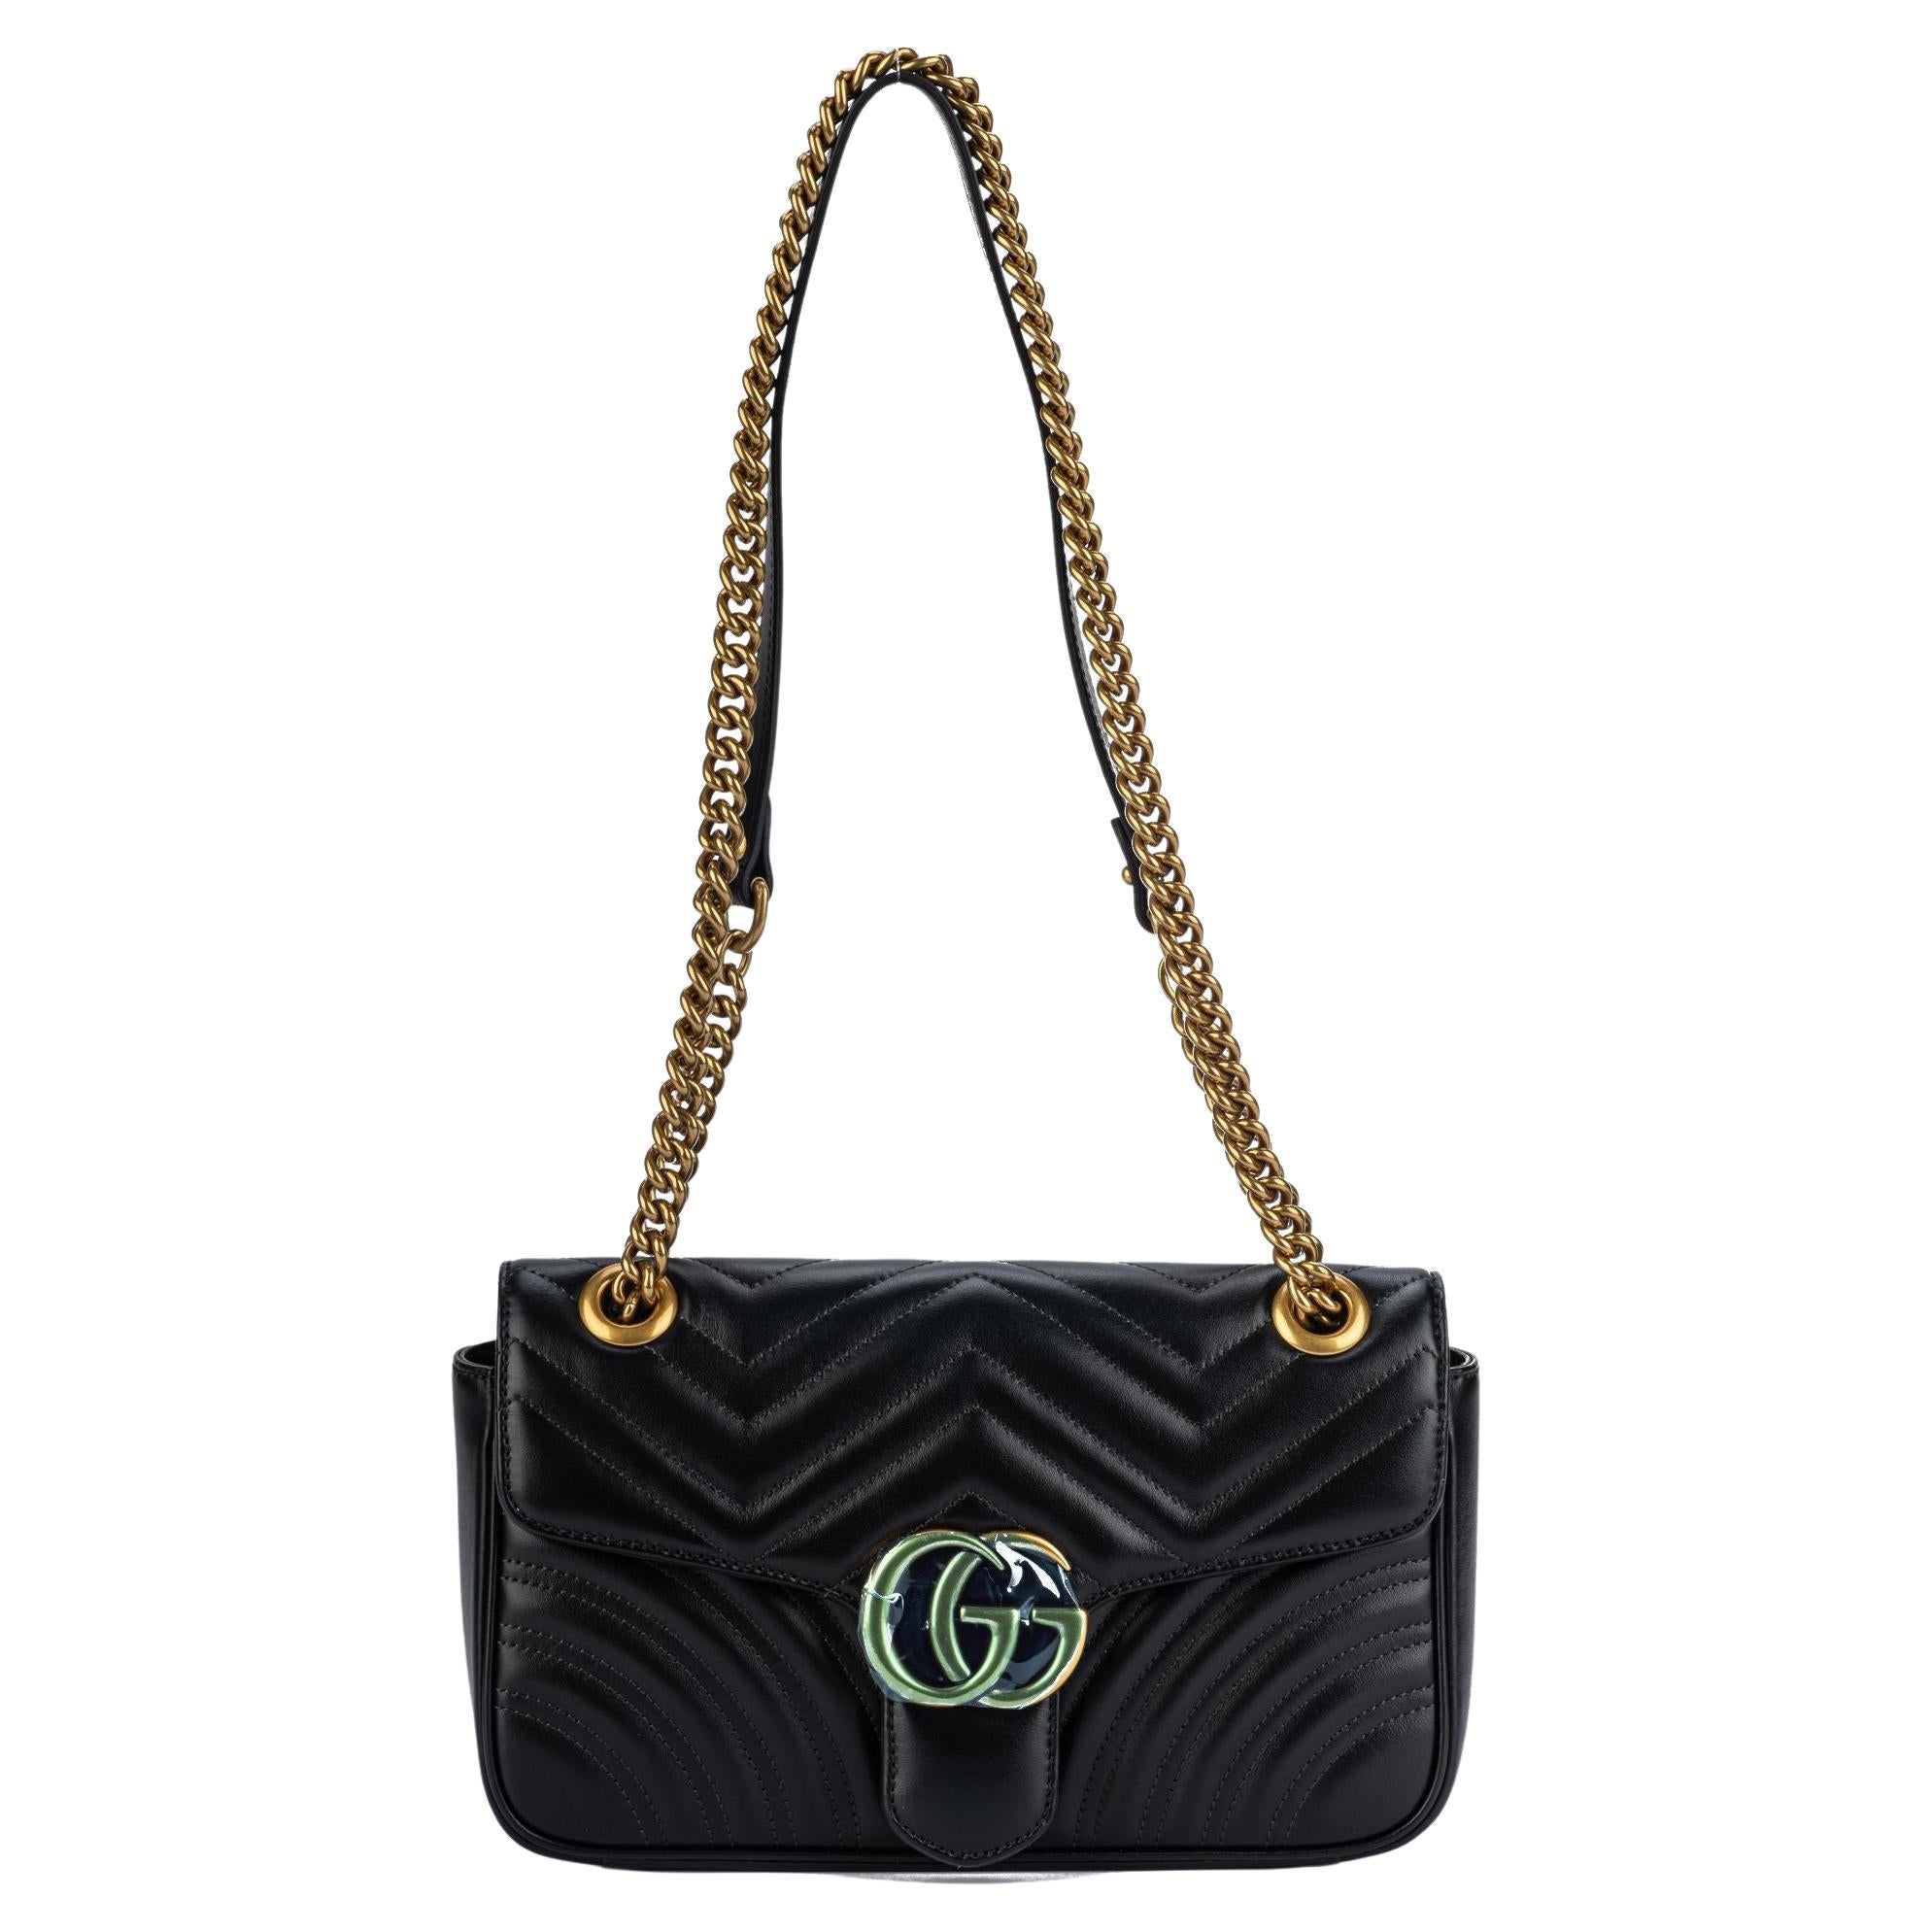 Gucci New Black Marmont Small Bag For Sale